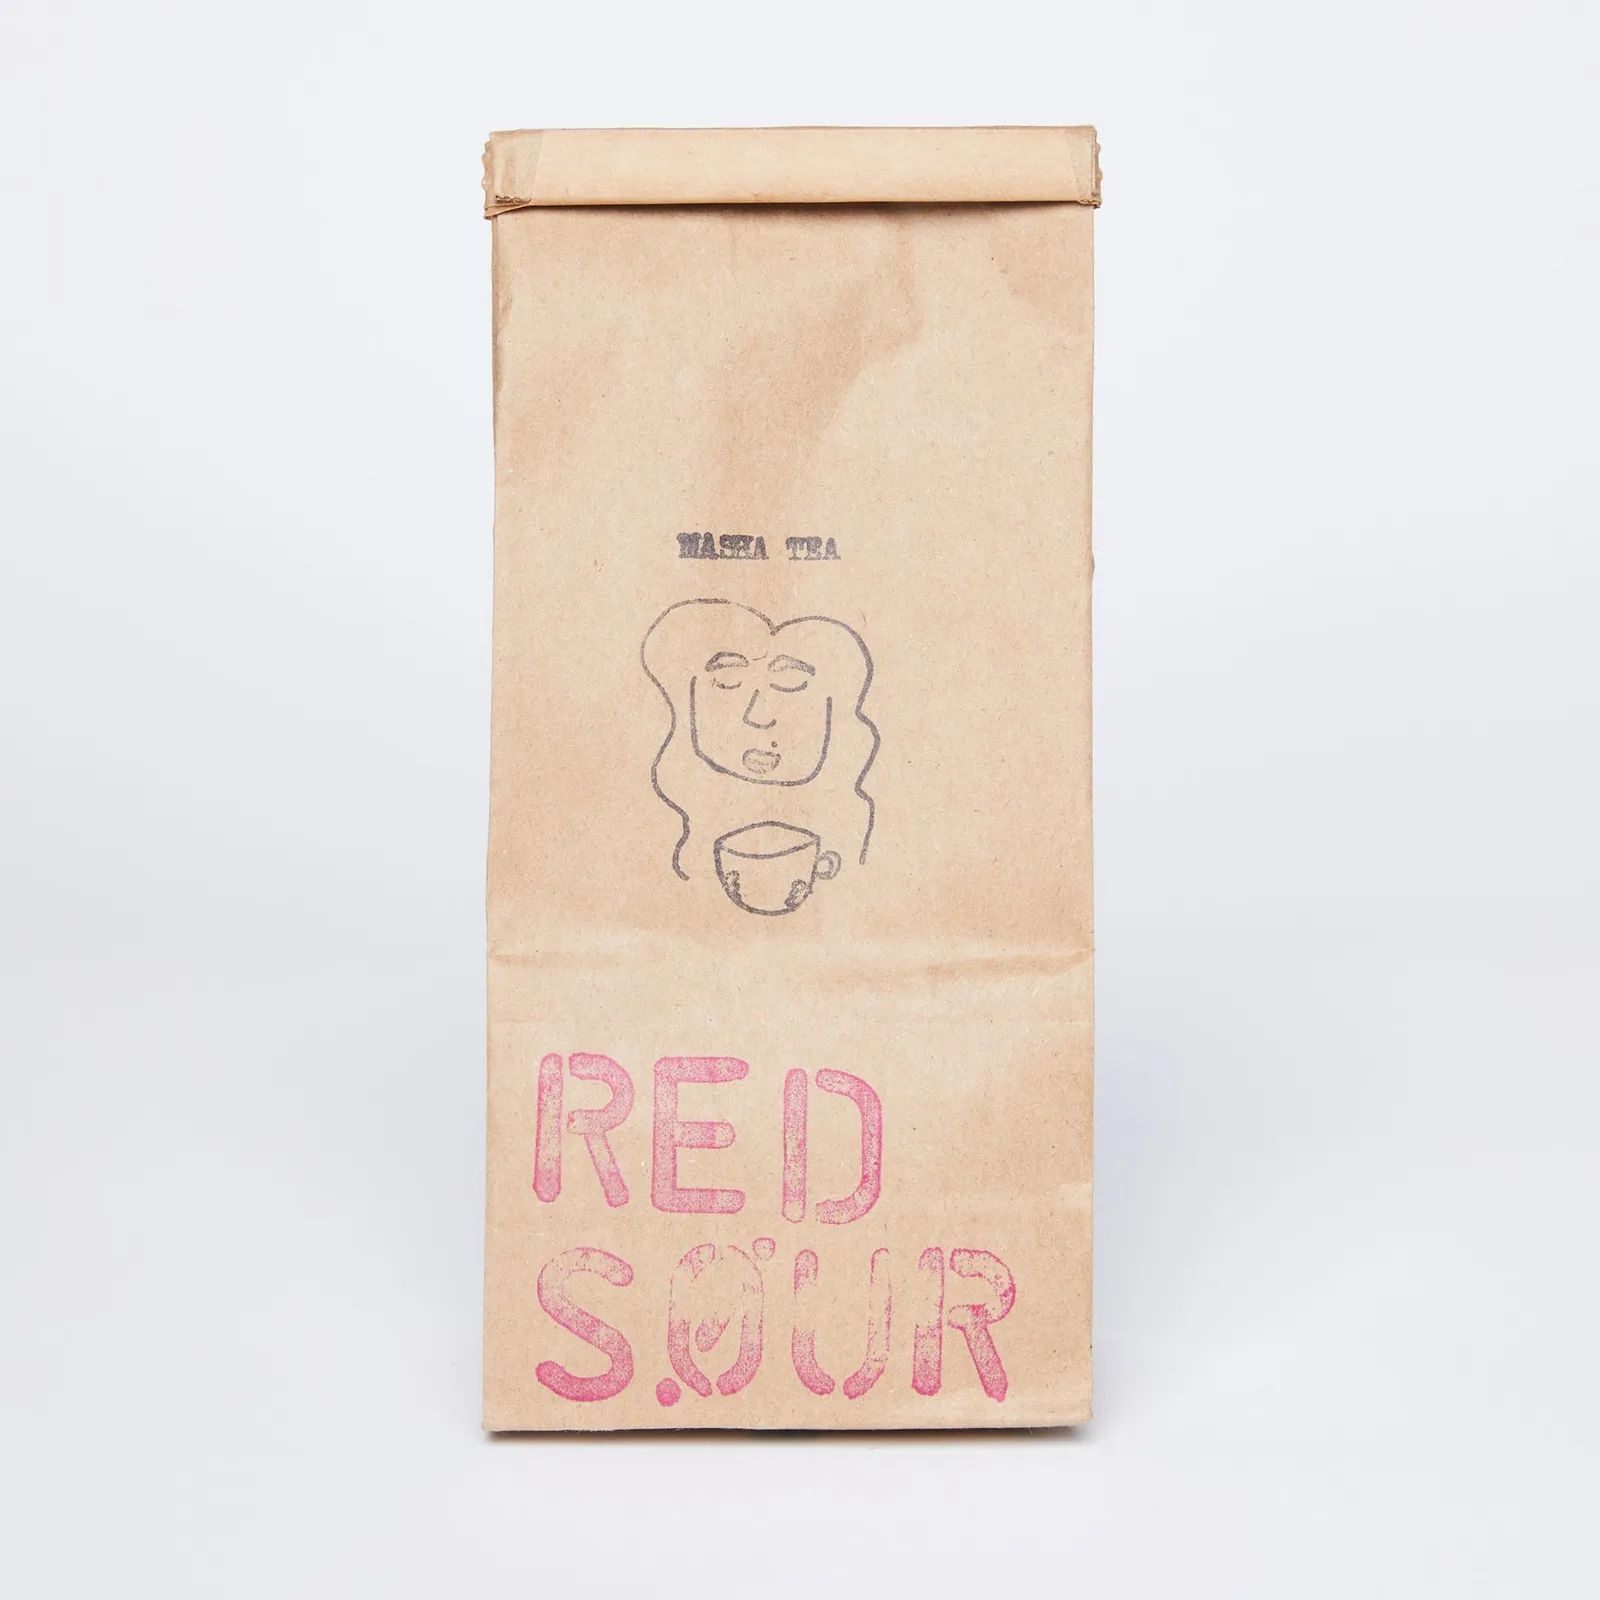 A tan bag of tea with a funky face drawn on it and the words "Red Sour" stamped on it